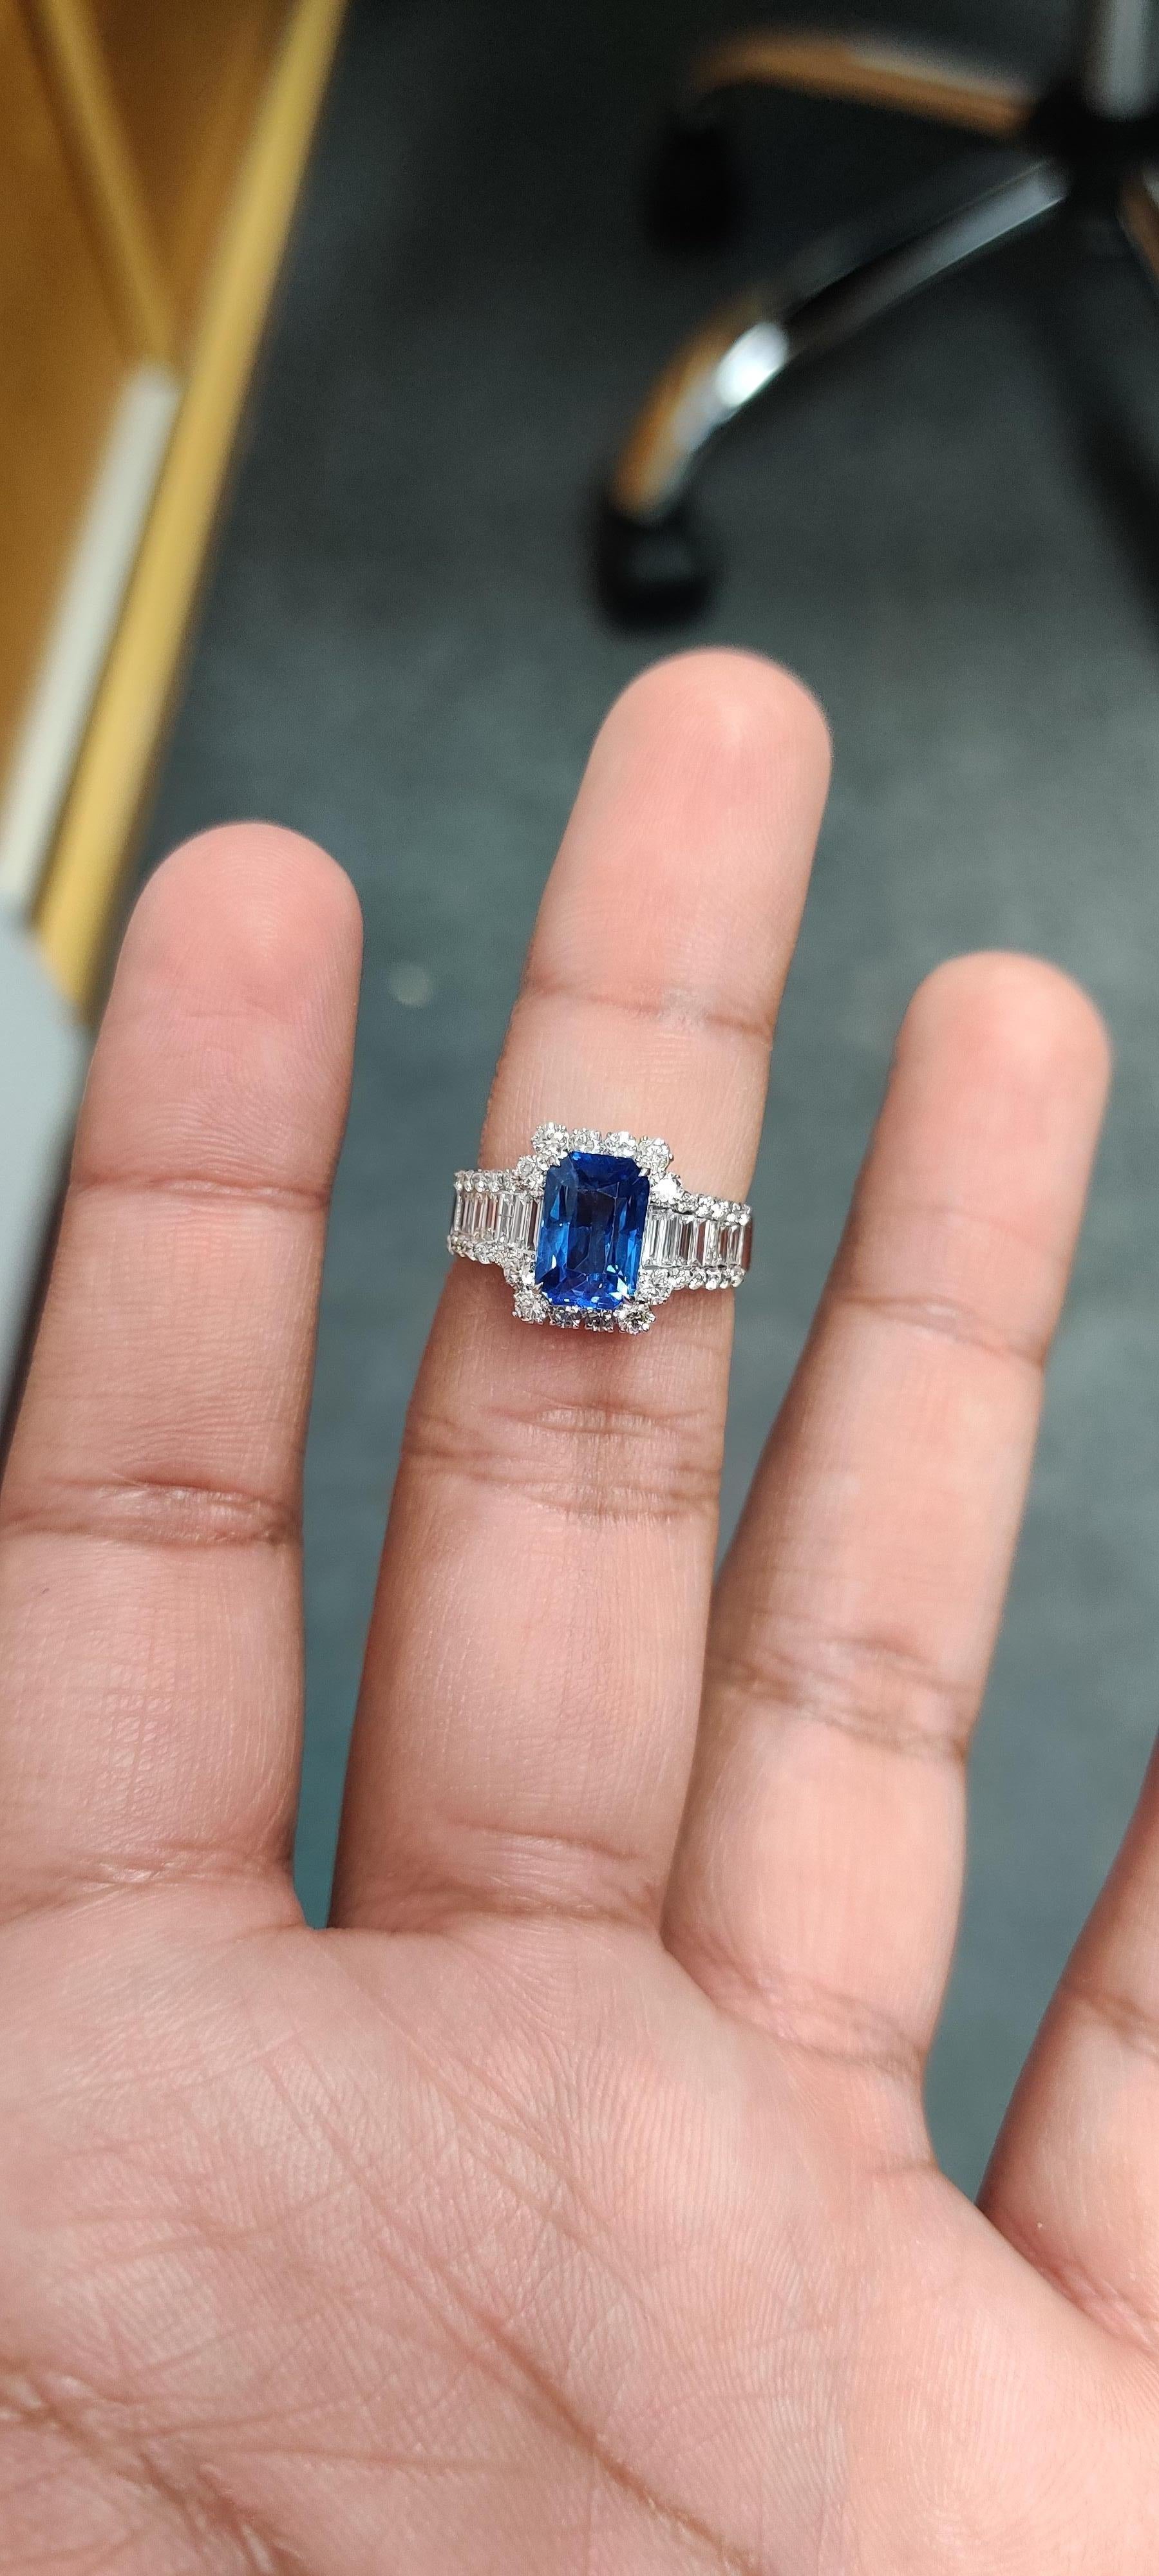 Introducing our gorgeous 2.87 Carat Sapphire Ring! It's a true beauty, carefully crafted with attention to every detail. The centerpiece is a stunning sapphire surrounded by shimmering diamonds, all set on a shiny 18K white gold band. It's a